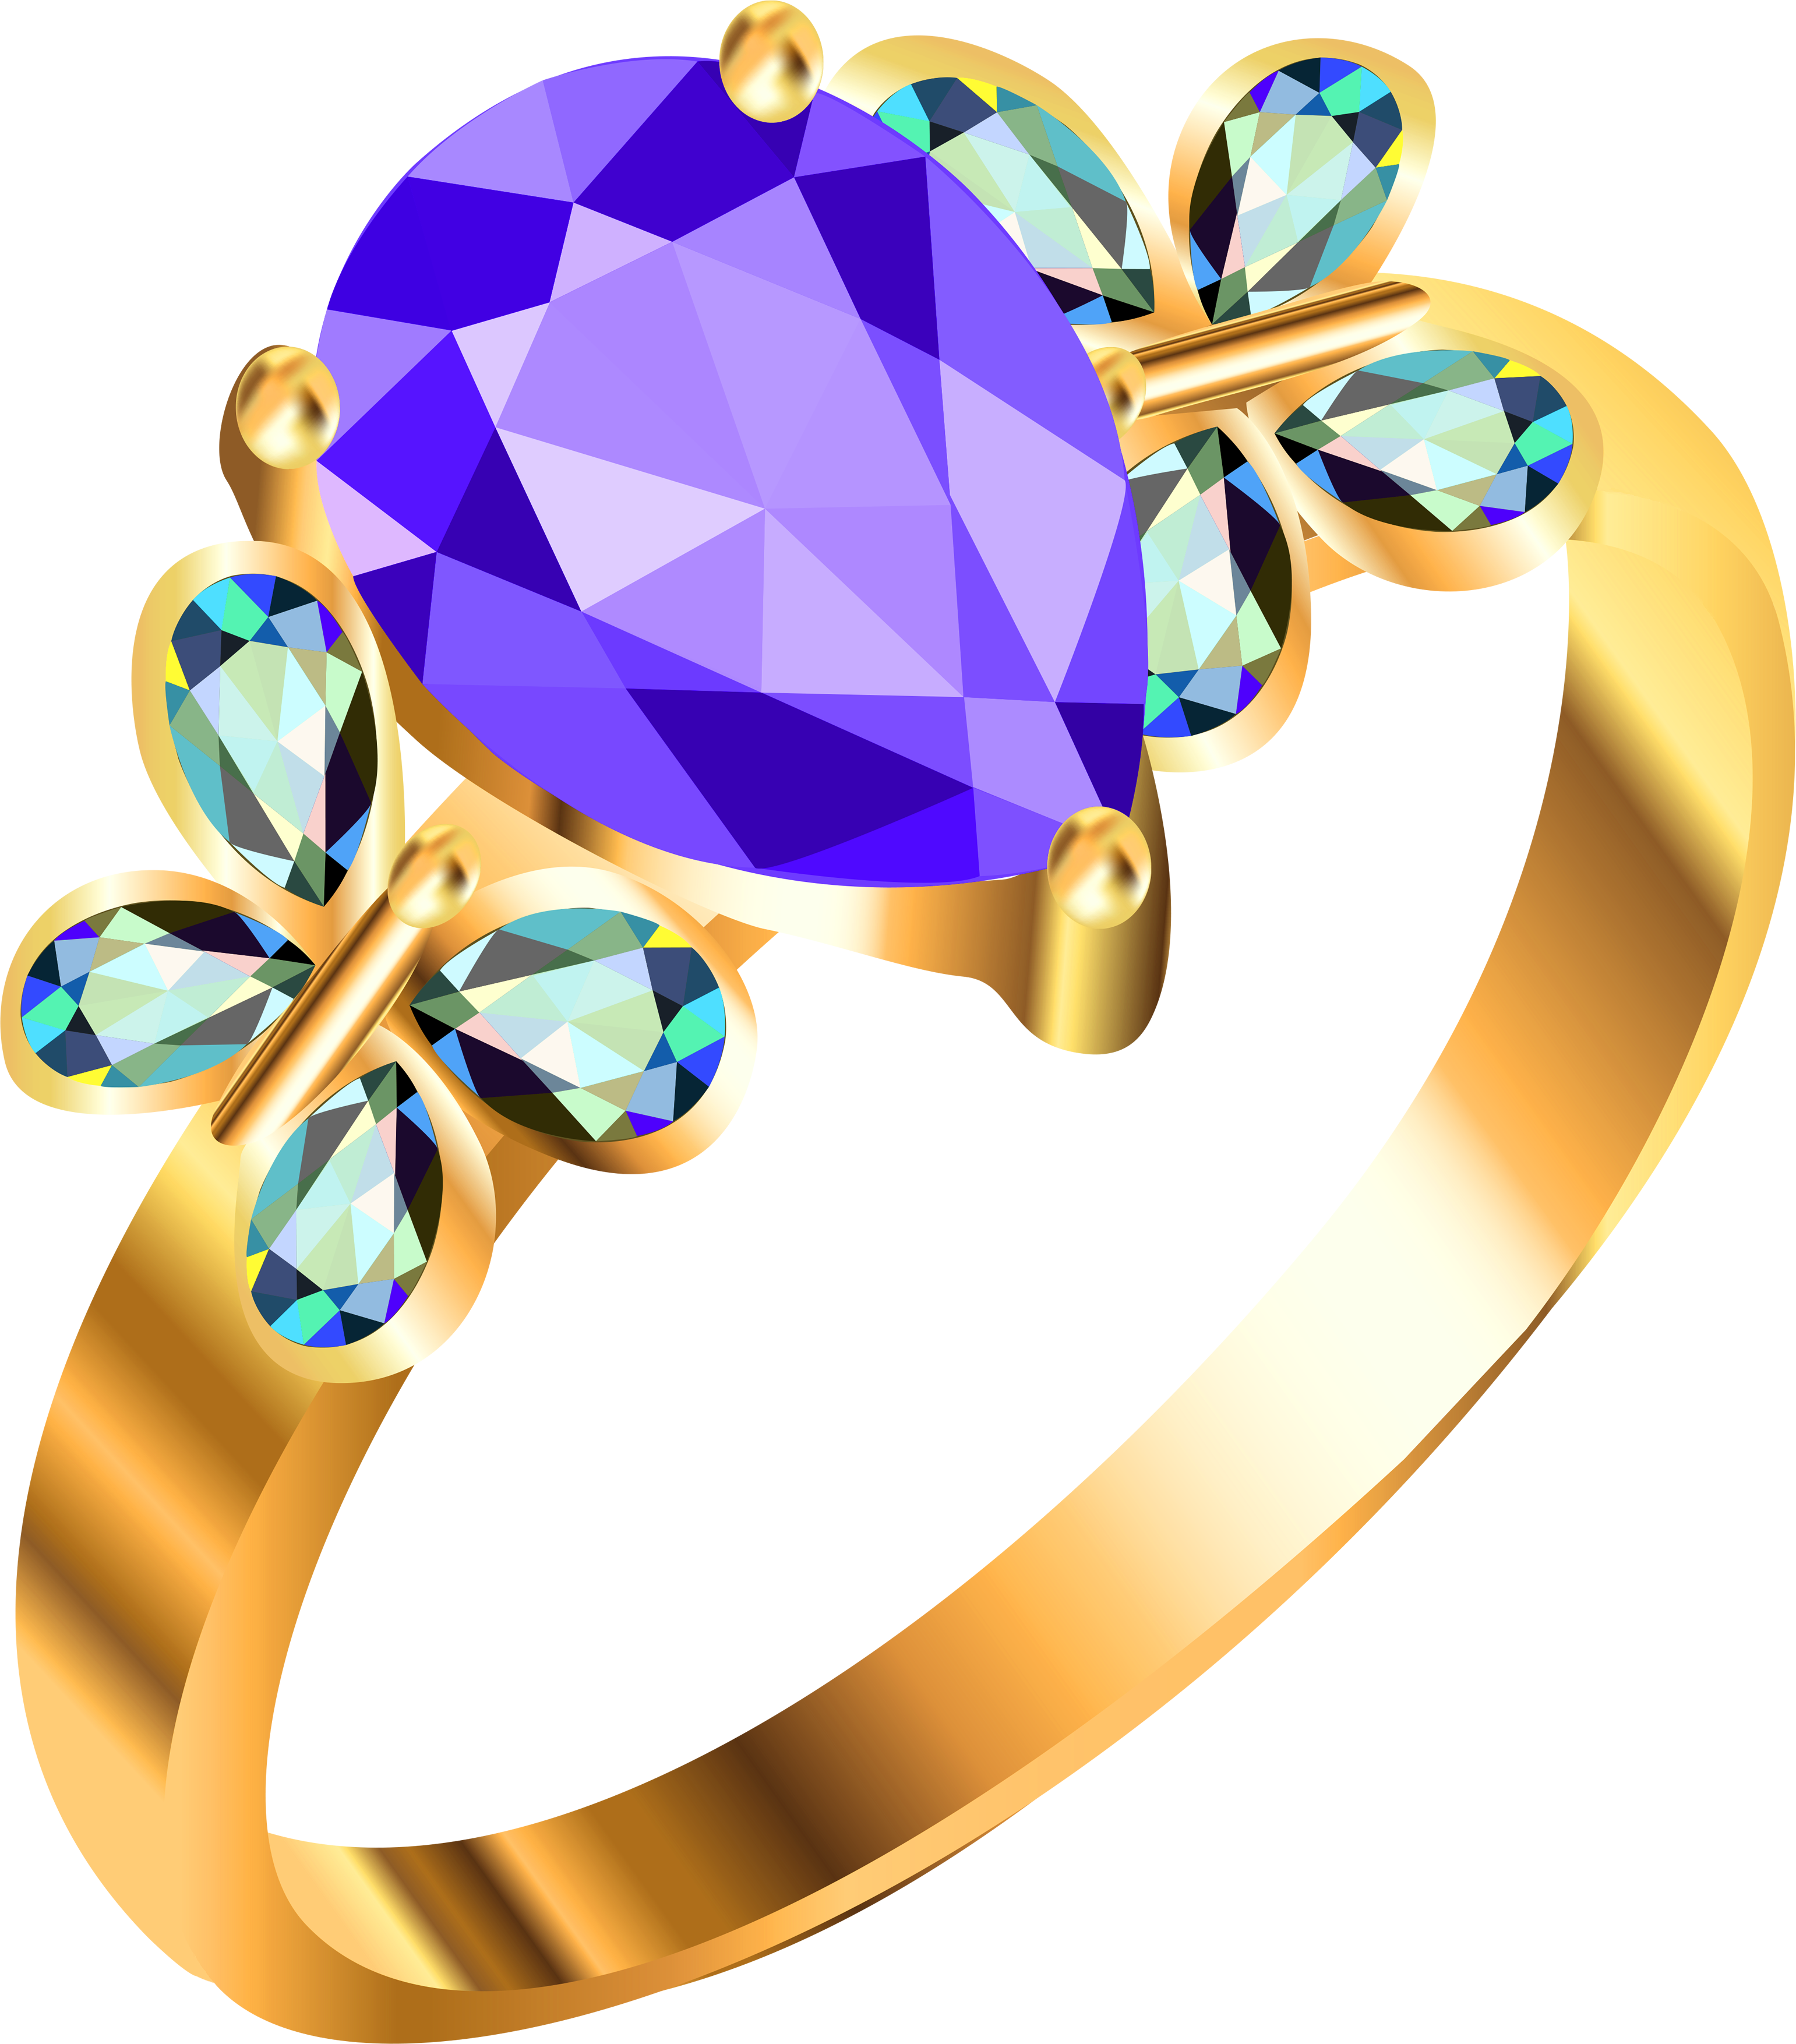 Free jewelry clipart images c